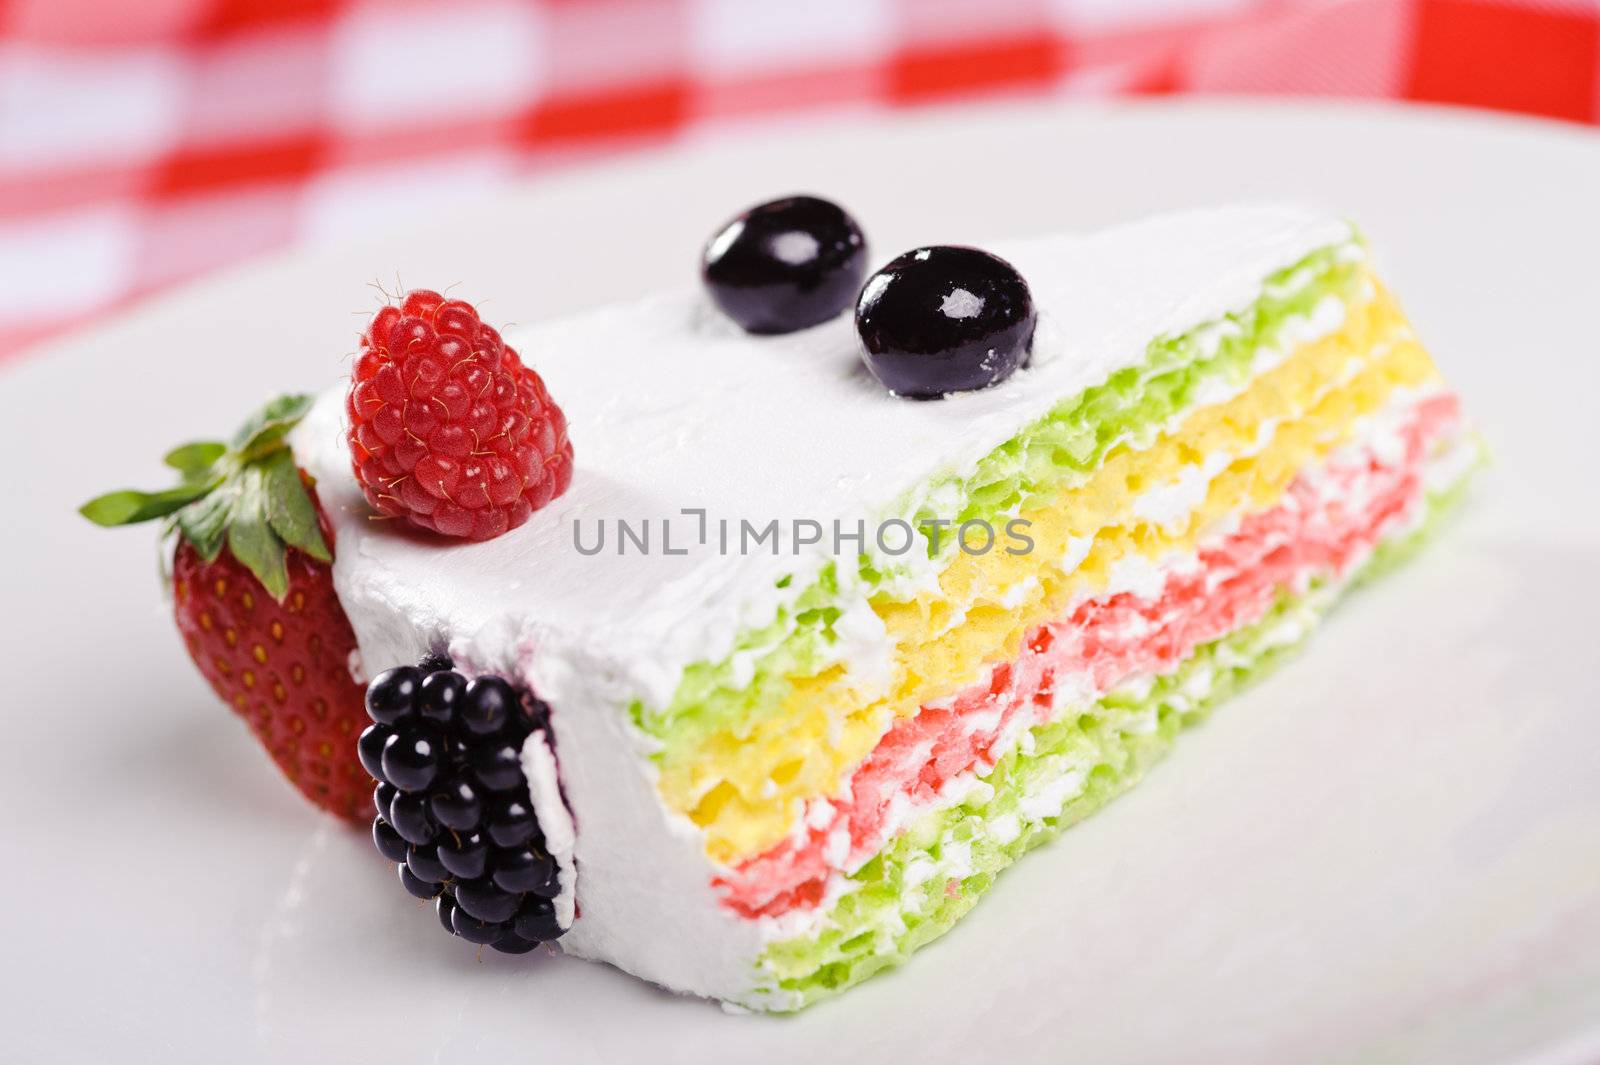 Piece of cake on plate with berries and fruits